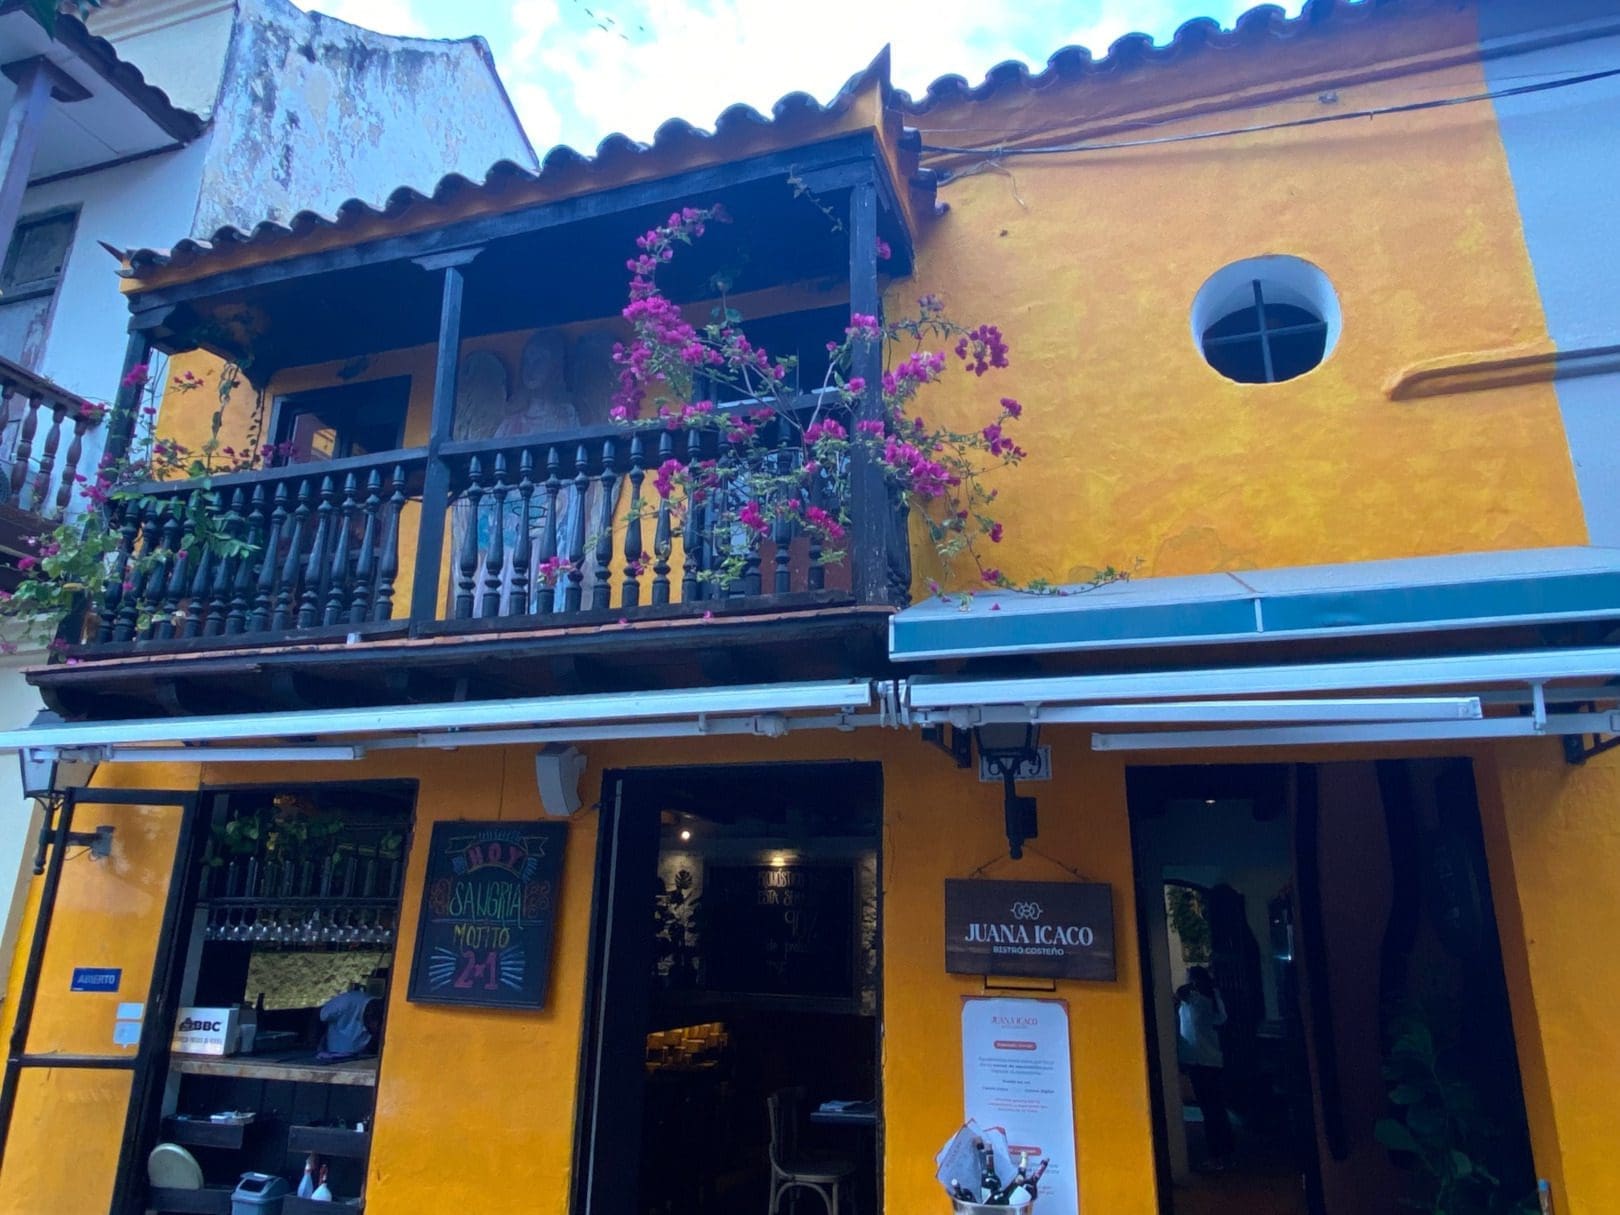 One of the many colourful houses in the walled city of Cartagena Colombia